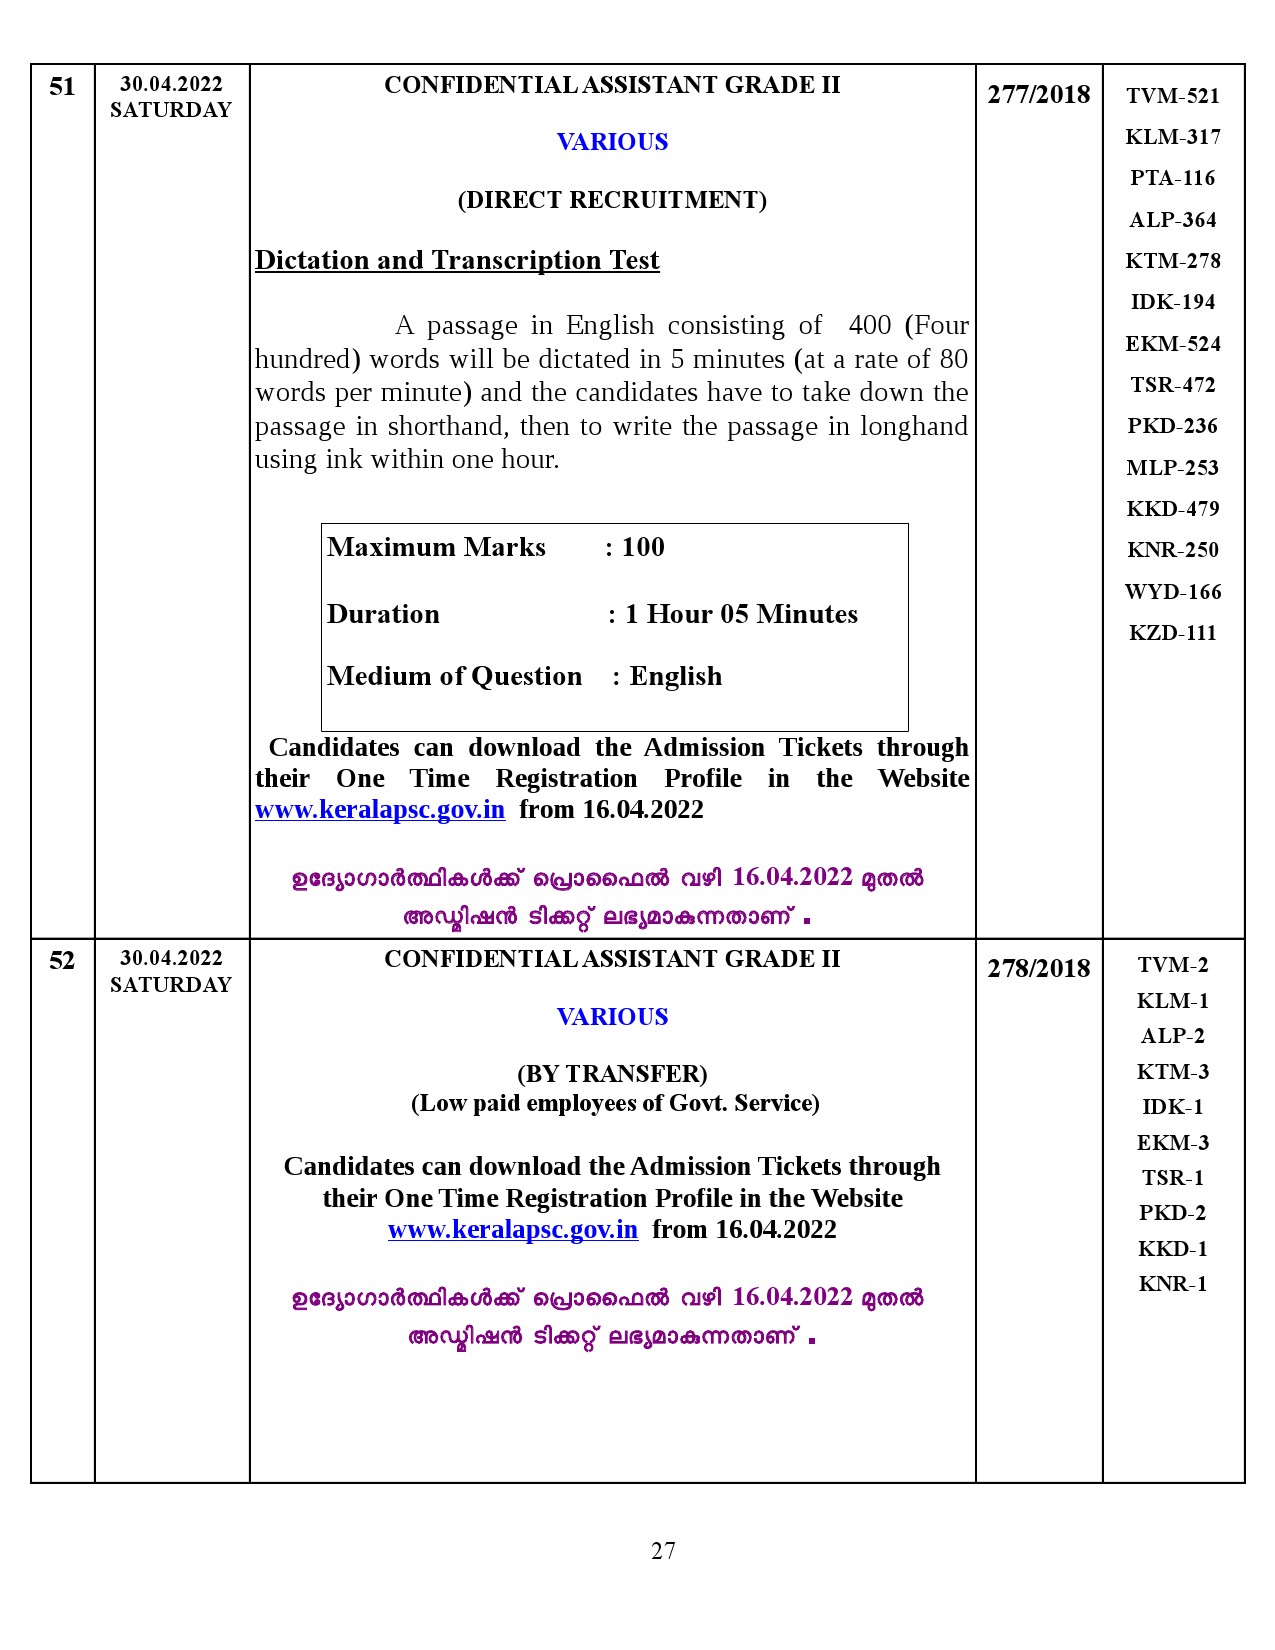 Examination Programme For The Month Of April 2022 - Notification Image 27